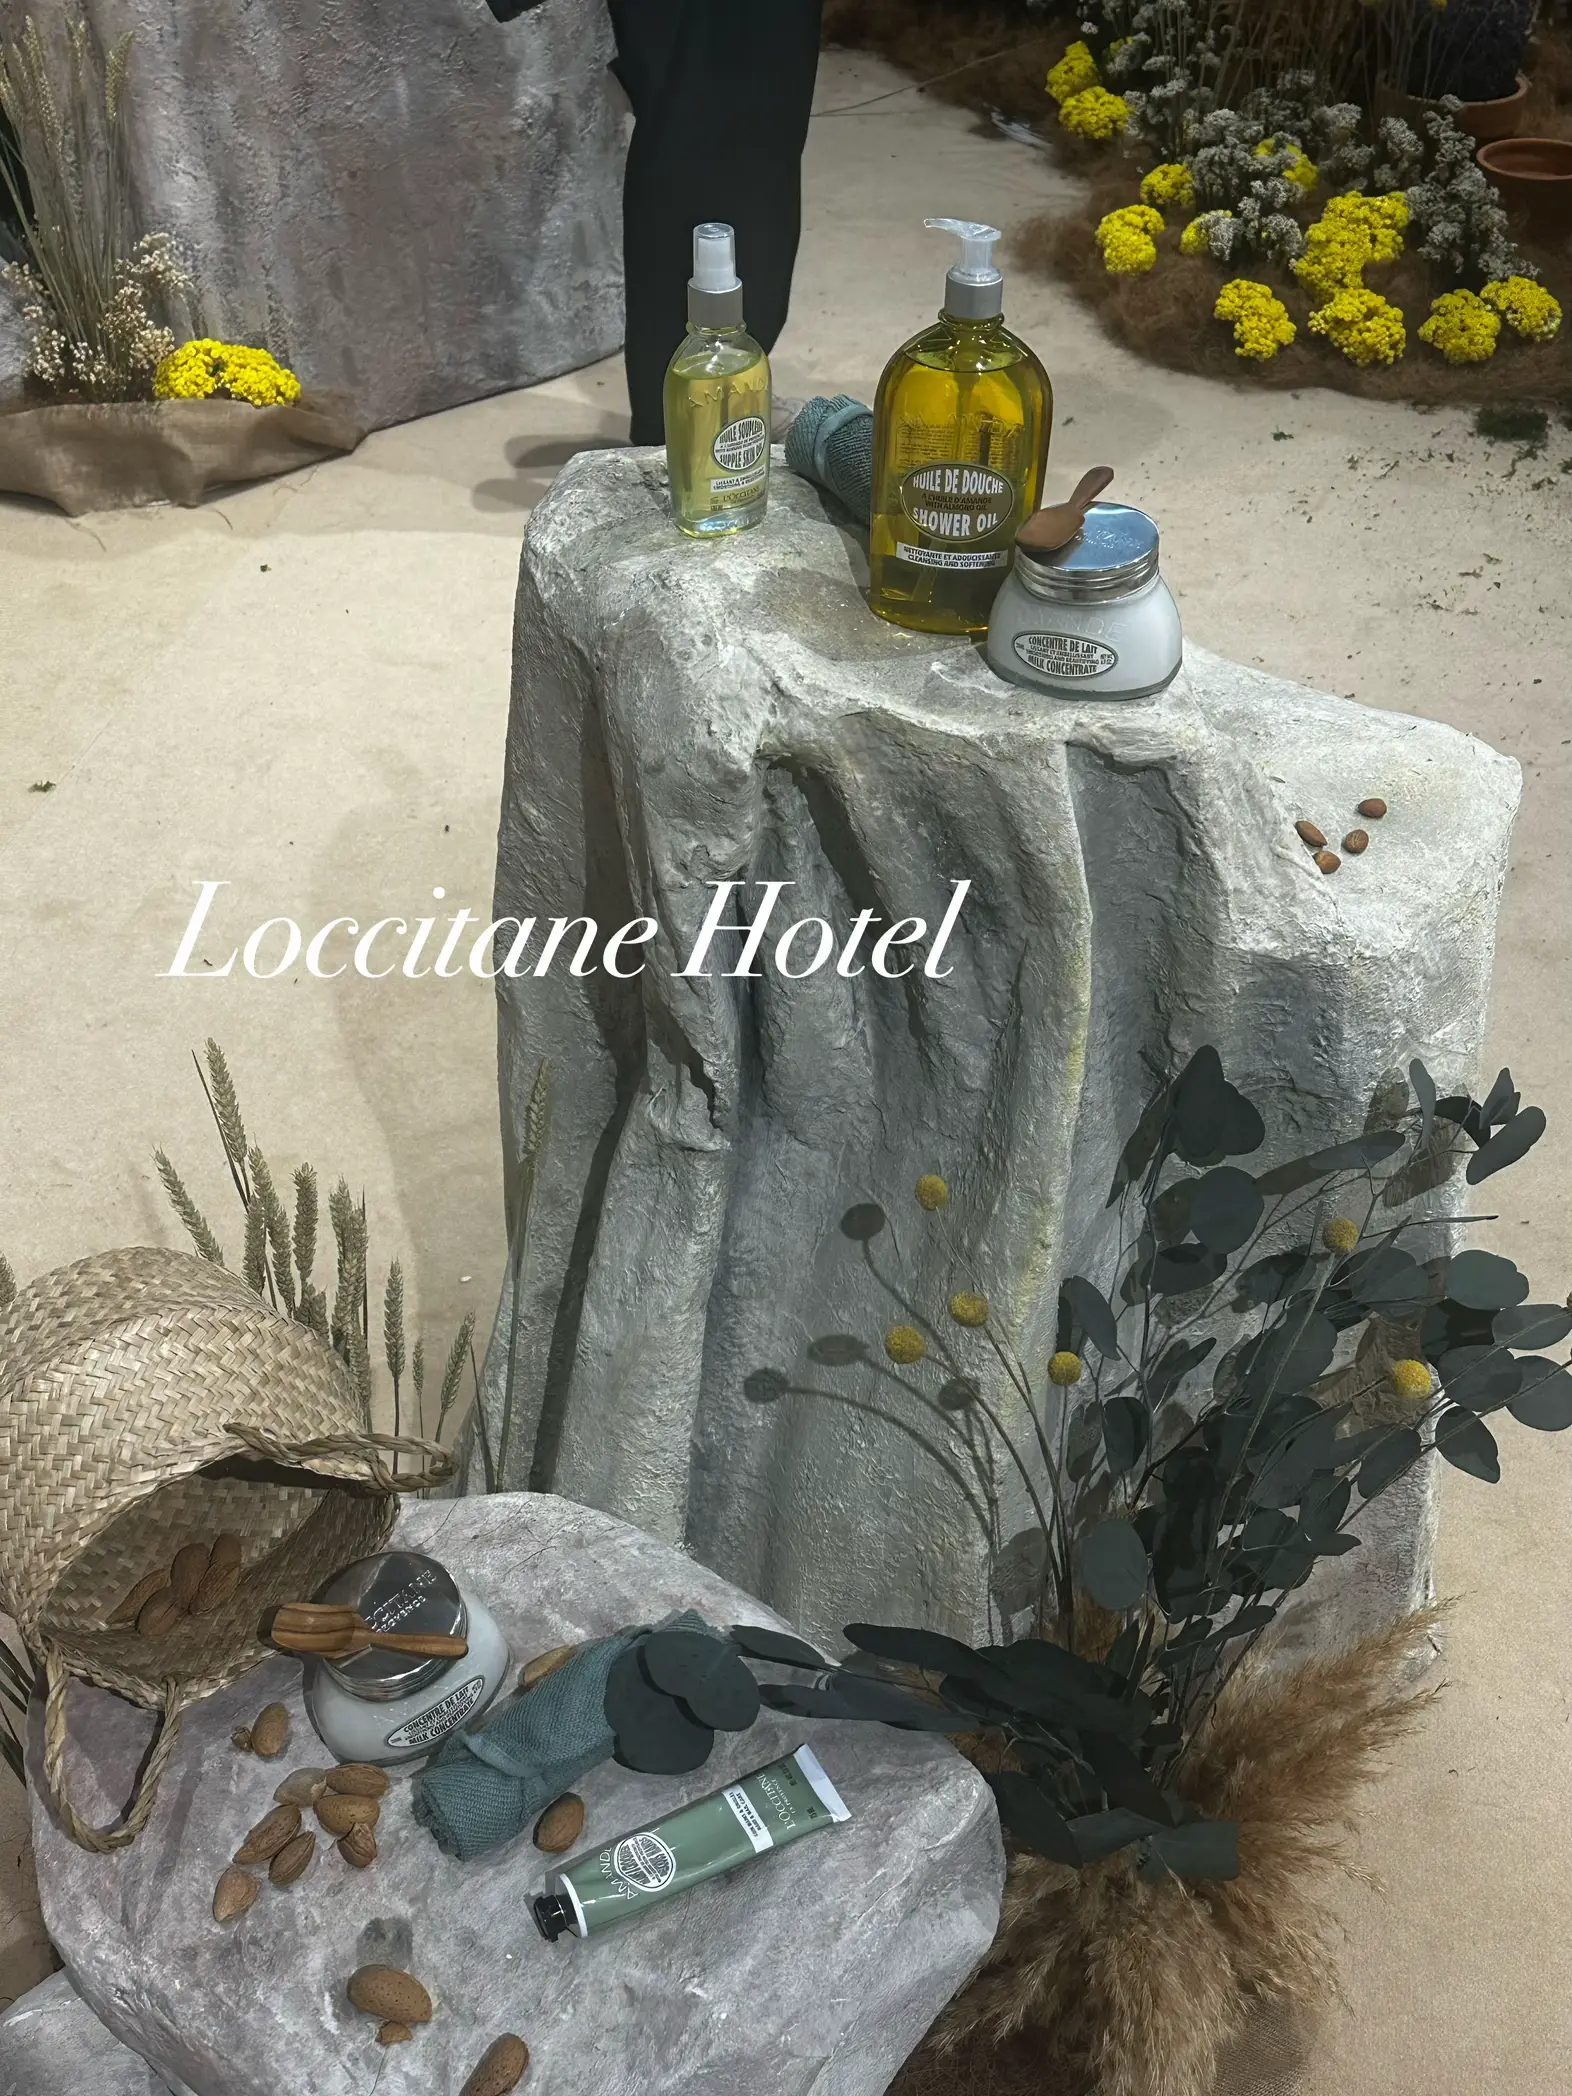 visit the Loccitane pop up for freebies!'s images(0)